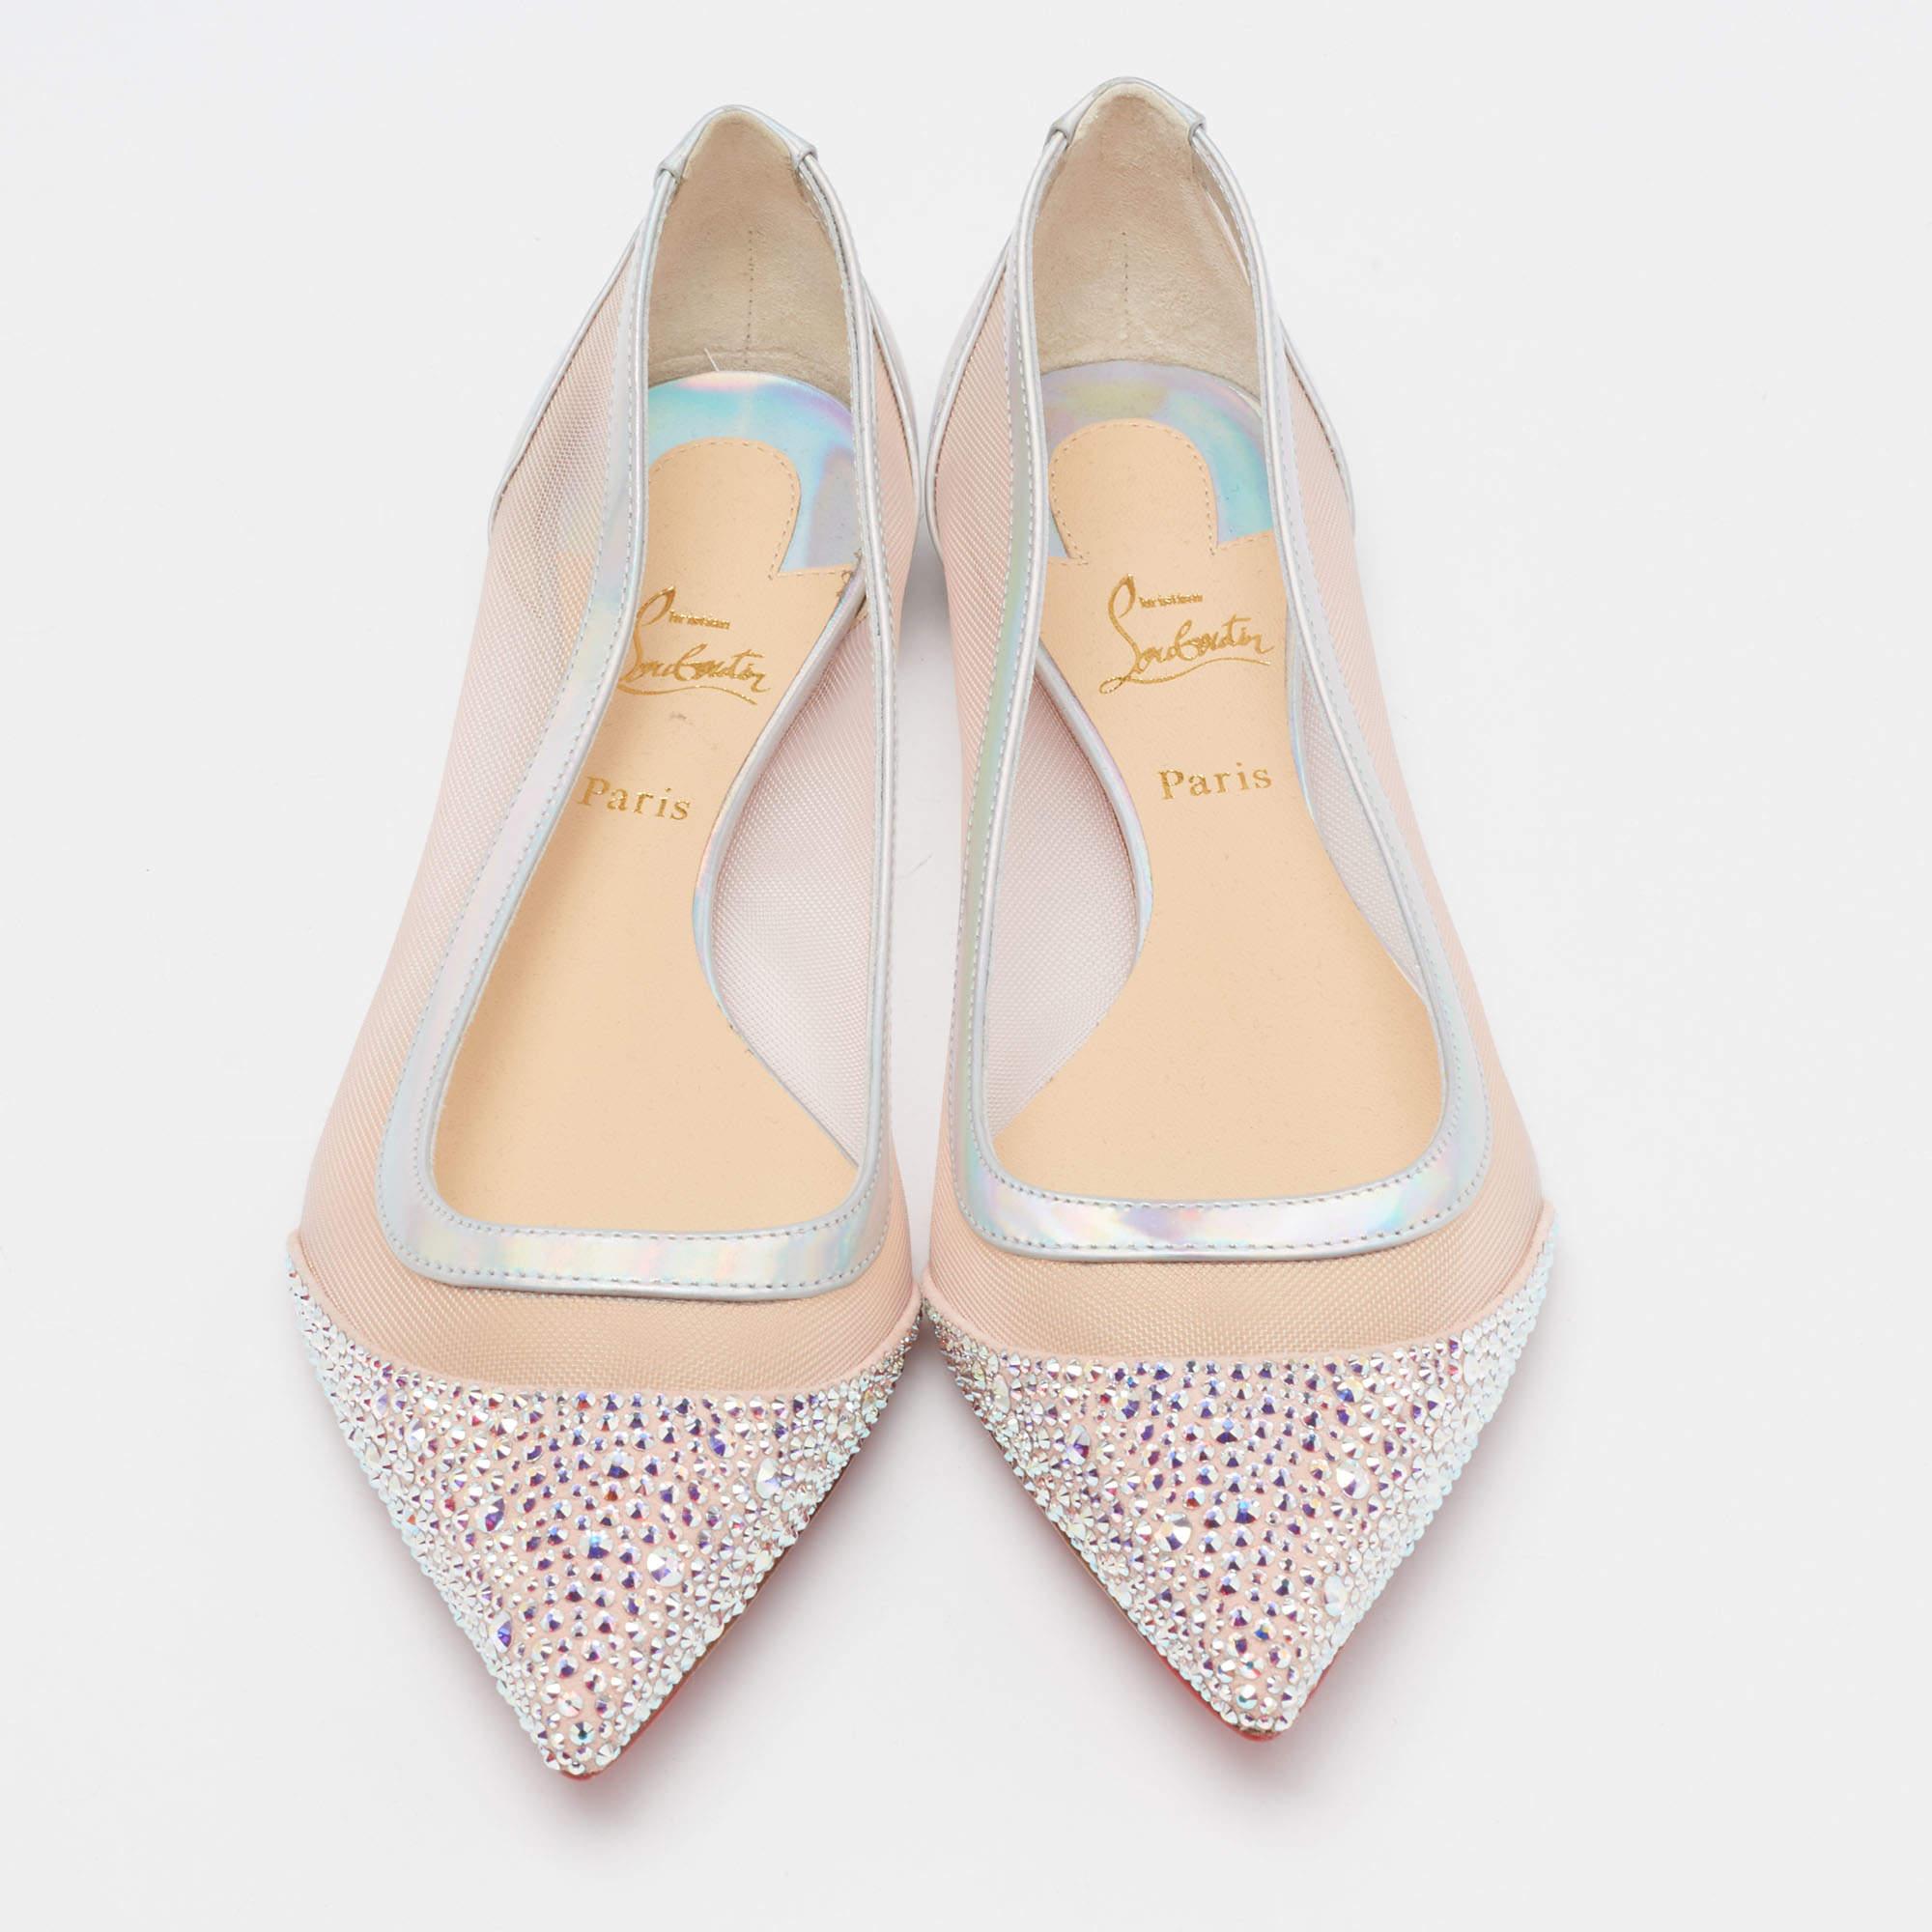 Christian Louboutin Mesh, Iridescent Leather and Suede Ballet Flats Size 35.5 For Sale 1